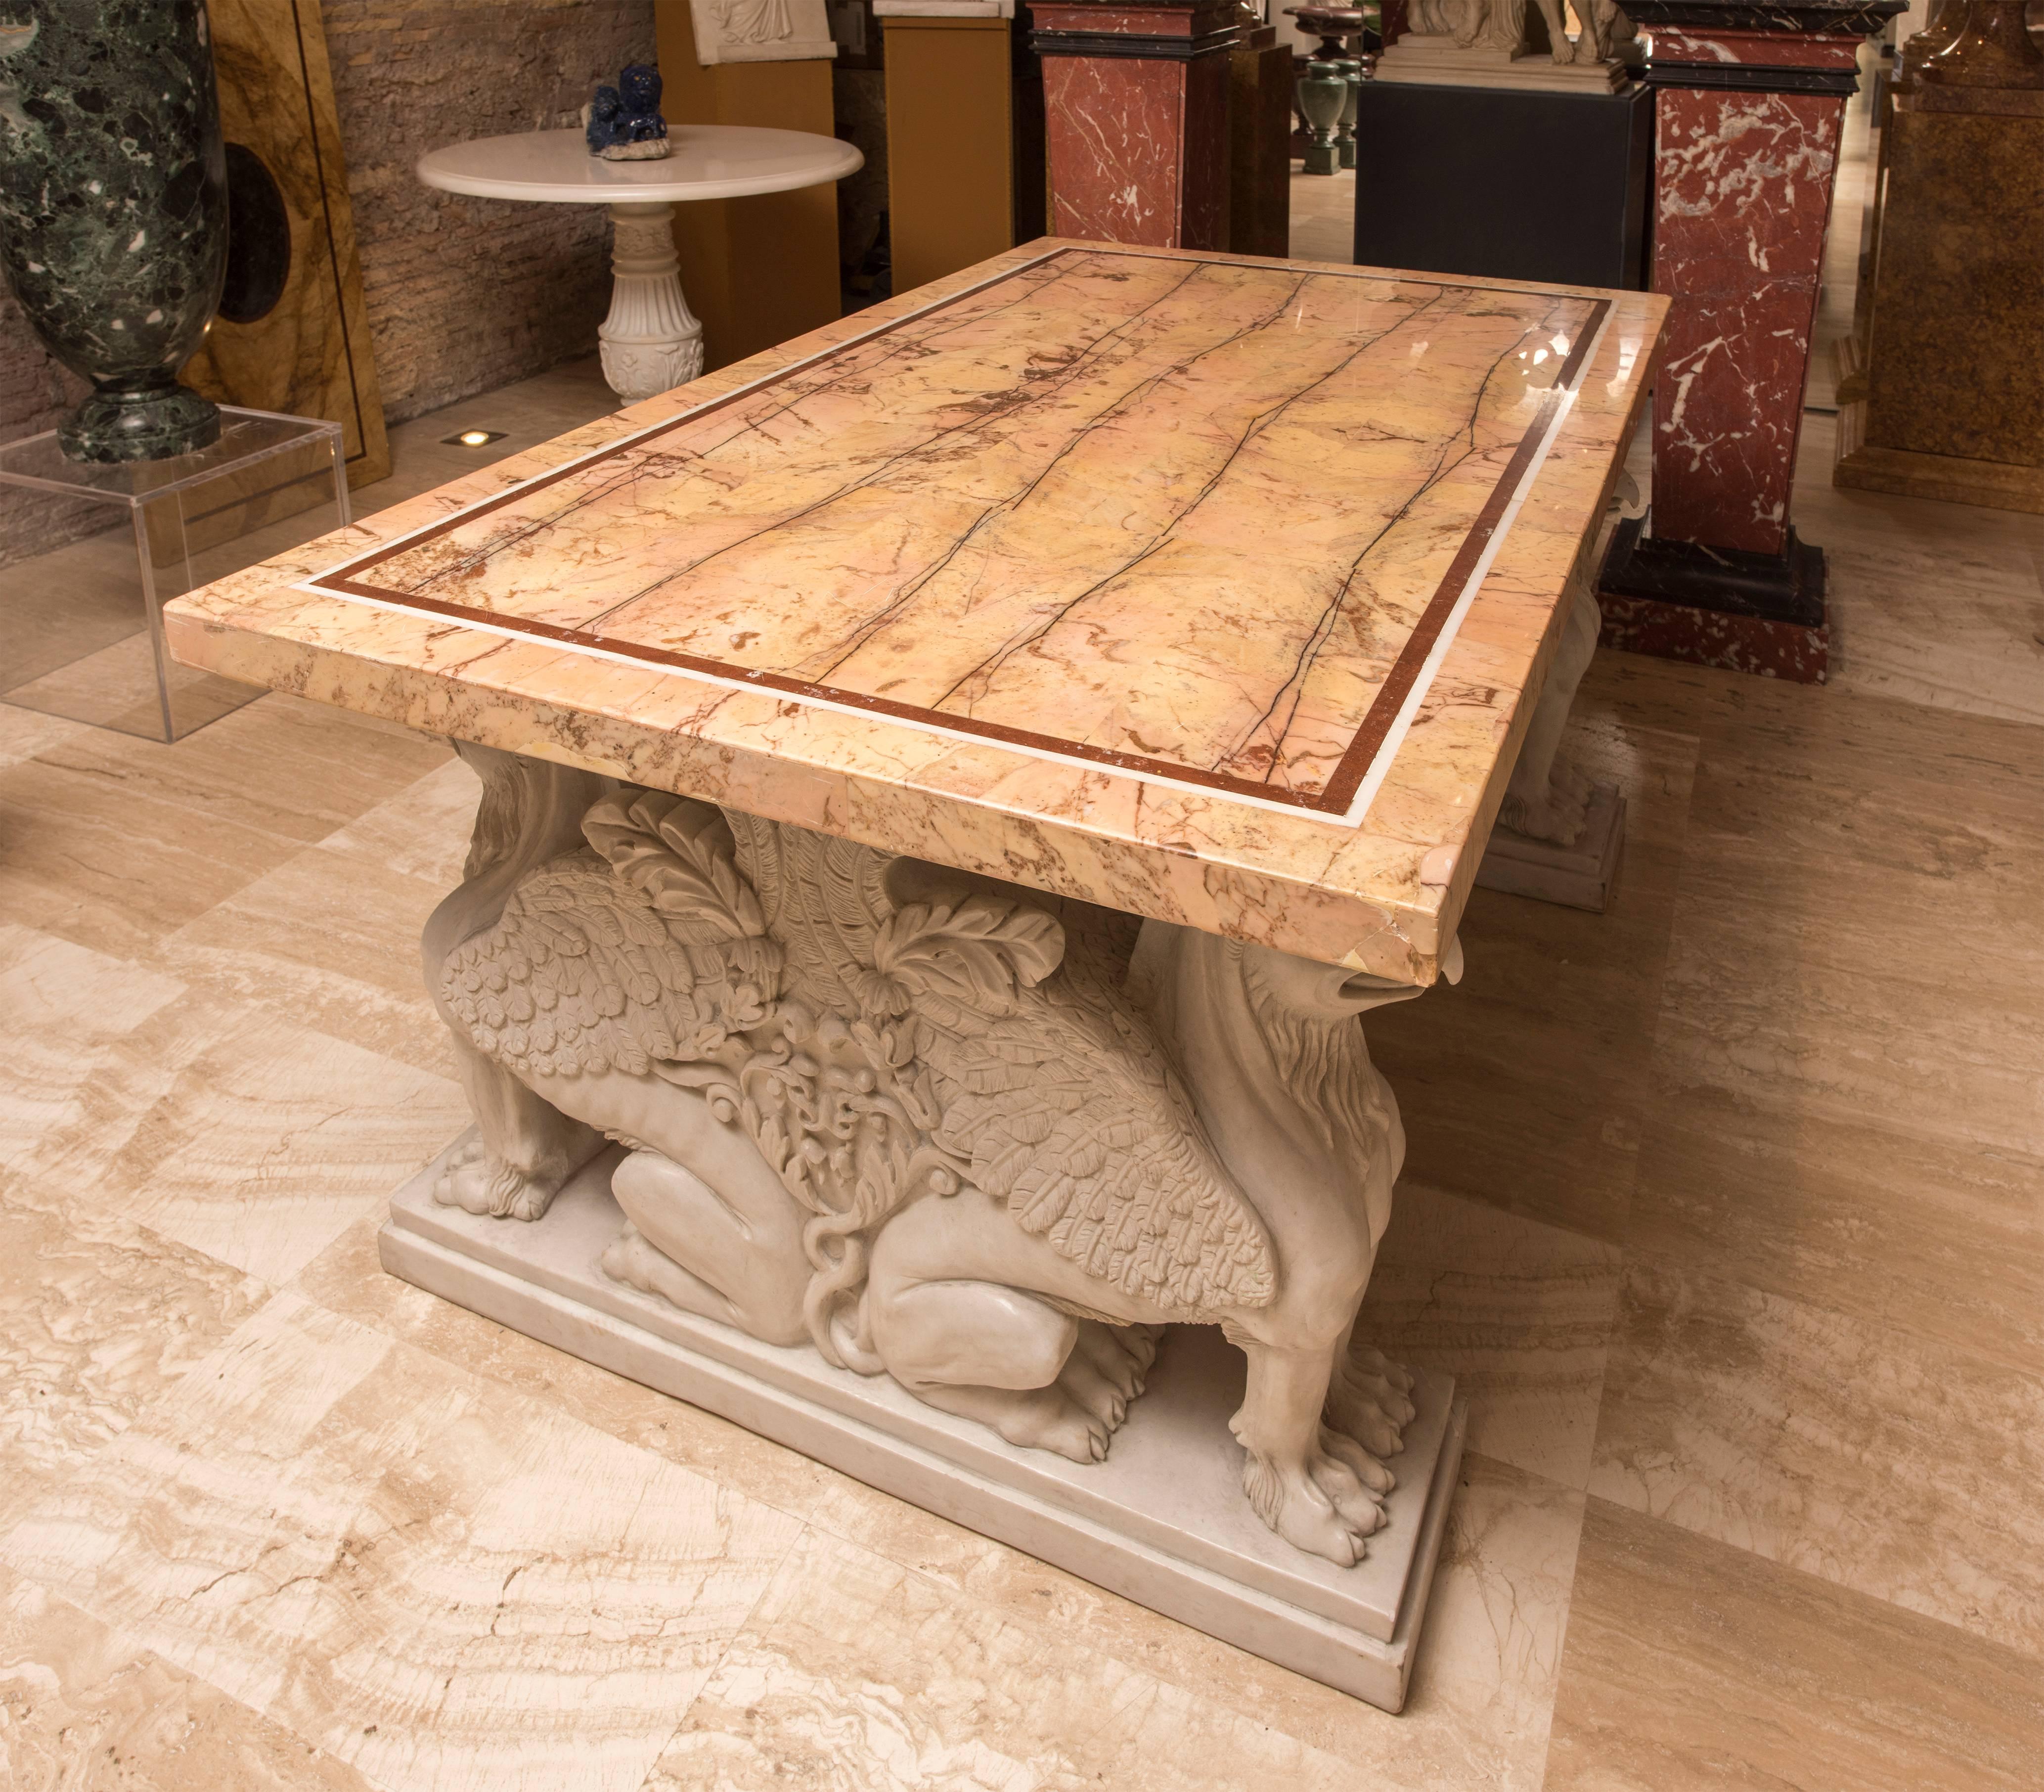 This specimen table is made with rare and ancient marble on neoclassical style legs made in white statuary marble. The top is a matching of Giallo Antico Marble bordered in a Porfido Rosso and Bianco Antico Frame. The top is made cutting very thin